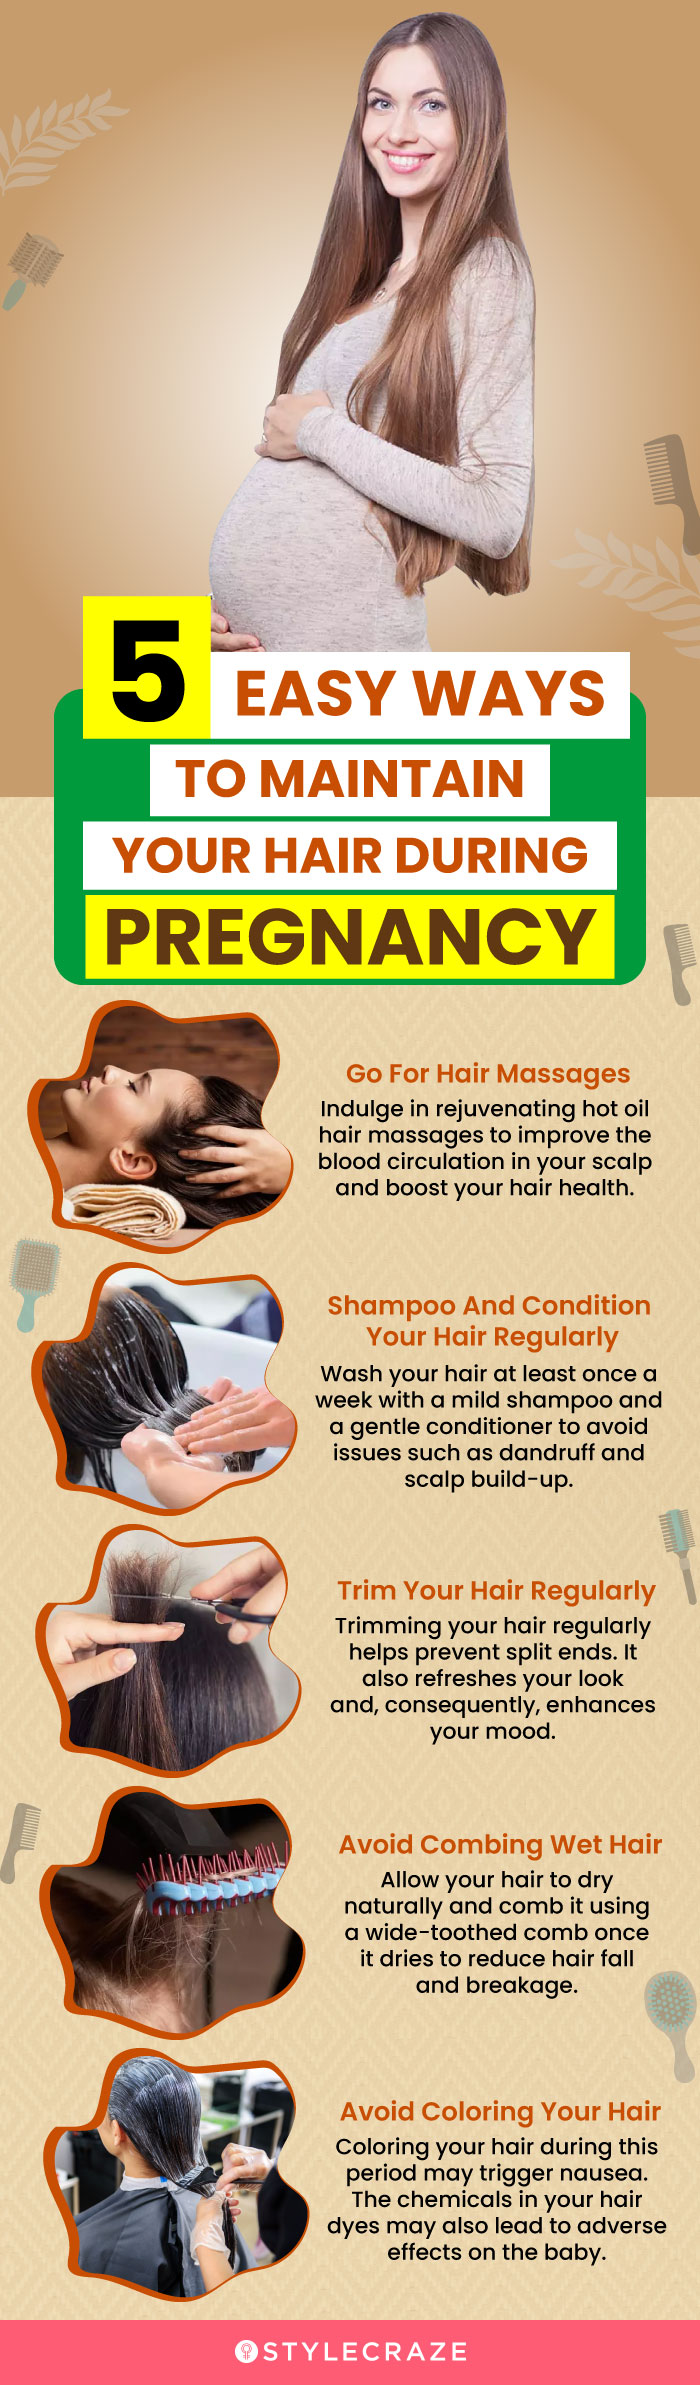 5 easy ways to maintain your hair during pregnancy (infographic)